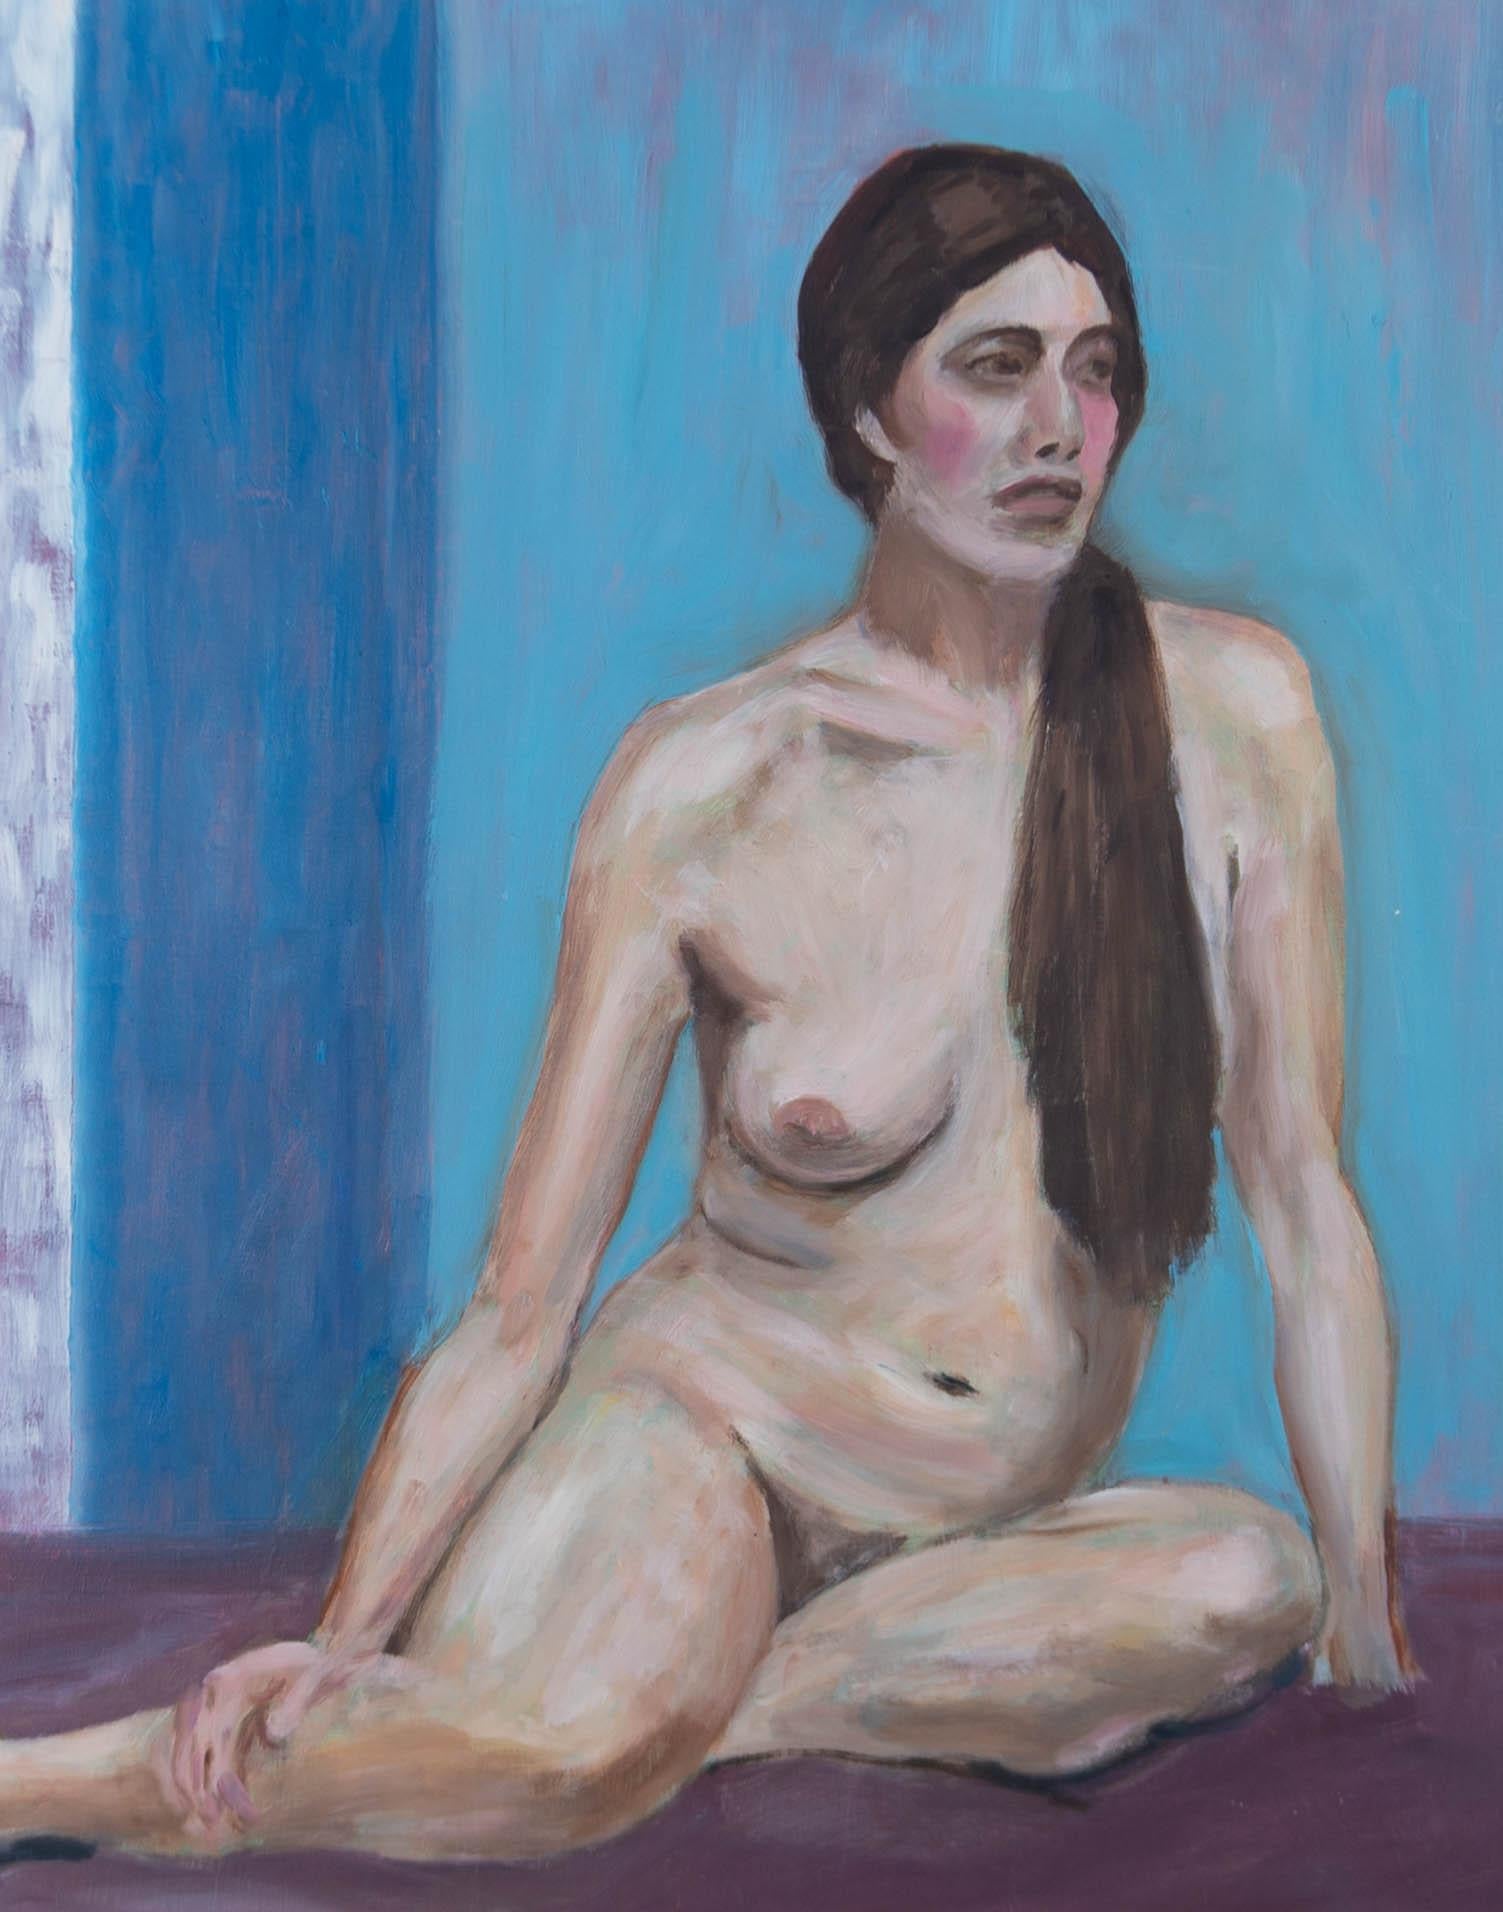 Unknown Portrait Painting - 20th Century Oil - Nude Portrait of a Woman